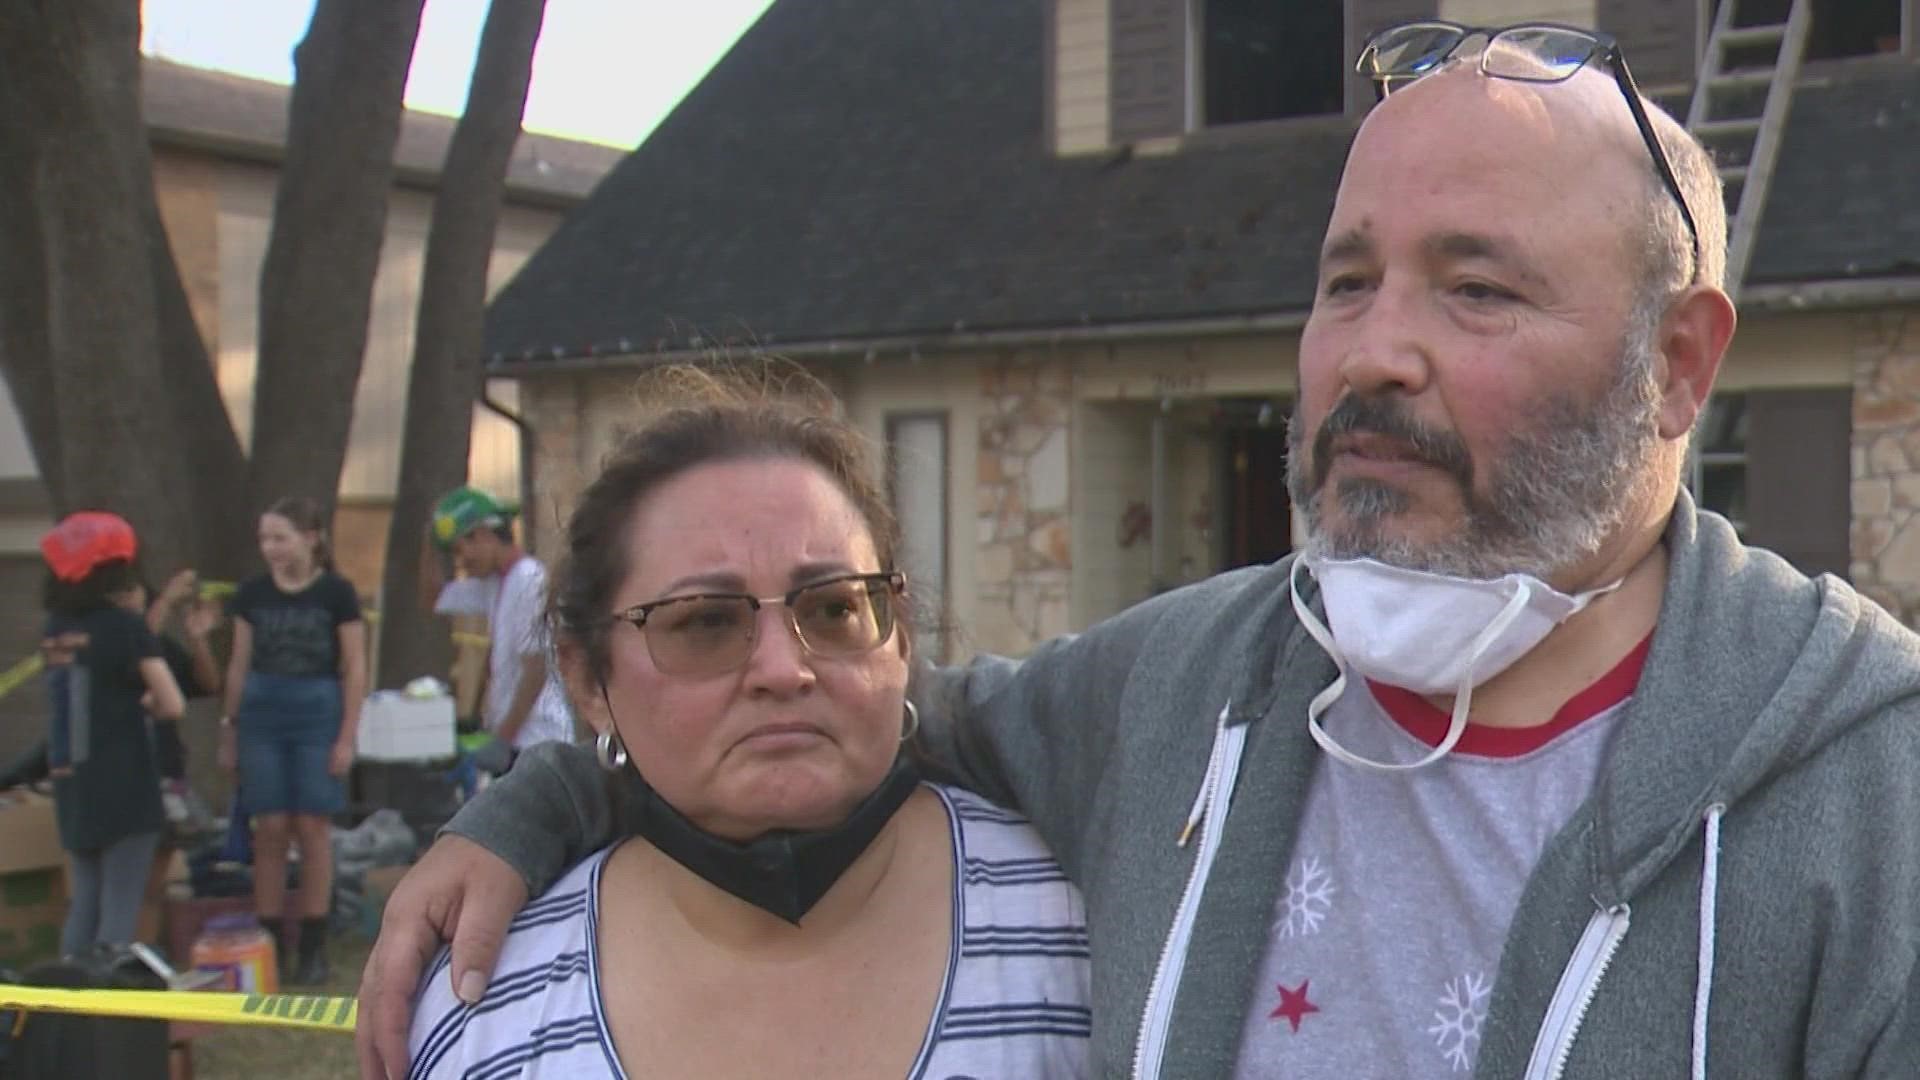 Two parents, their five children and five pets made it out safely. The family said the cause was electrical, not fireworks as originally thought.